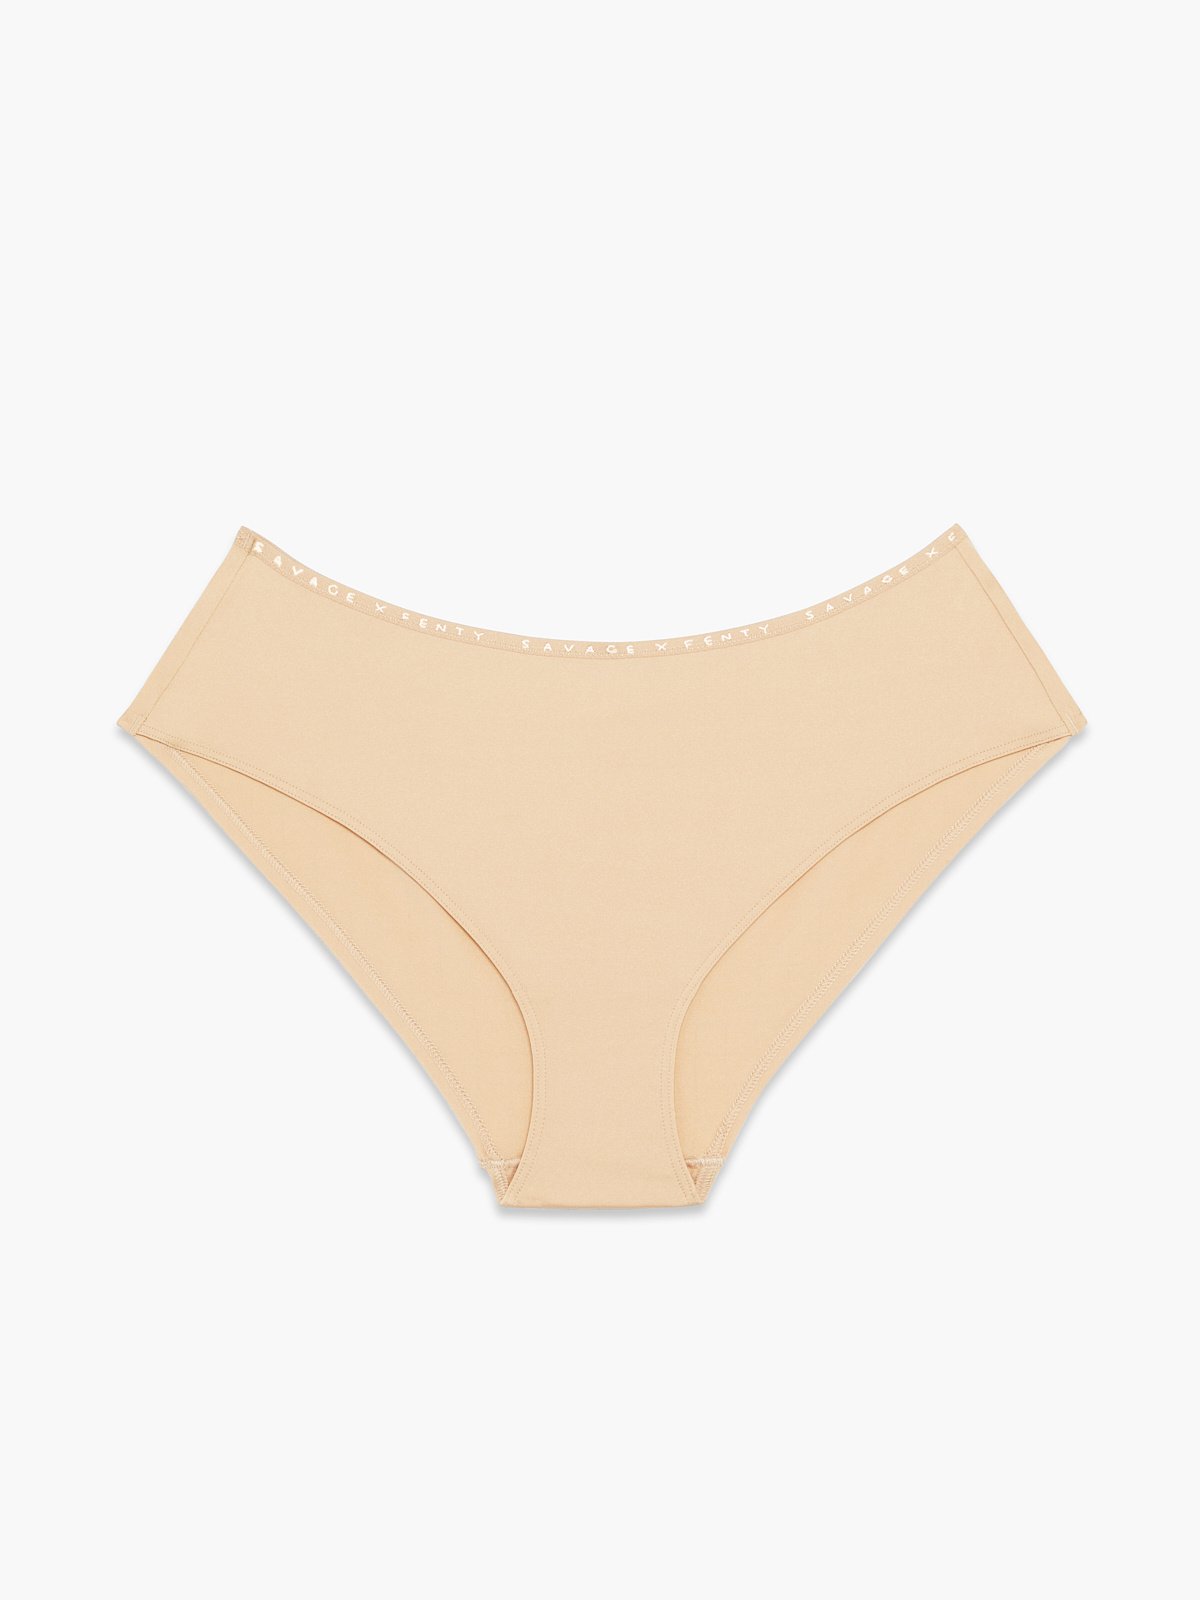 https://cdn.savagex.com/media/images/products/UD2355513-9011/MICROFIBER-HIPSTER-PANTY-UD2355513-9011-LAYDOWN-1200x1600.jpg